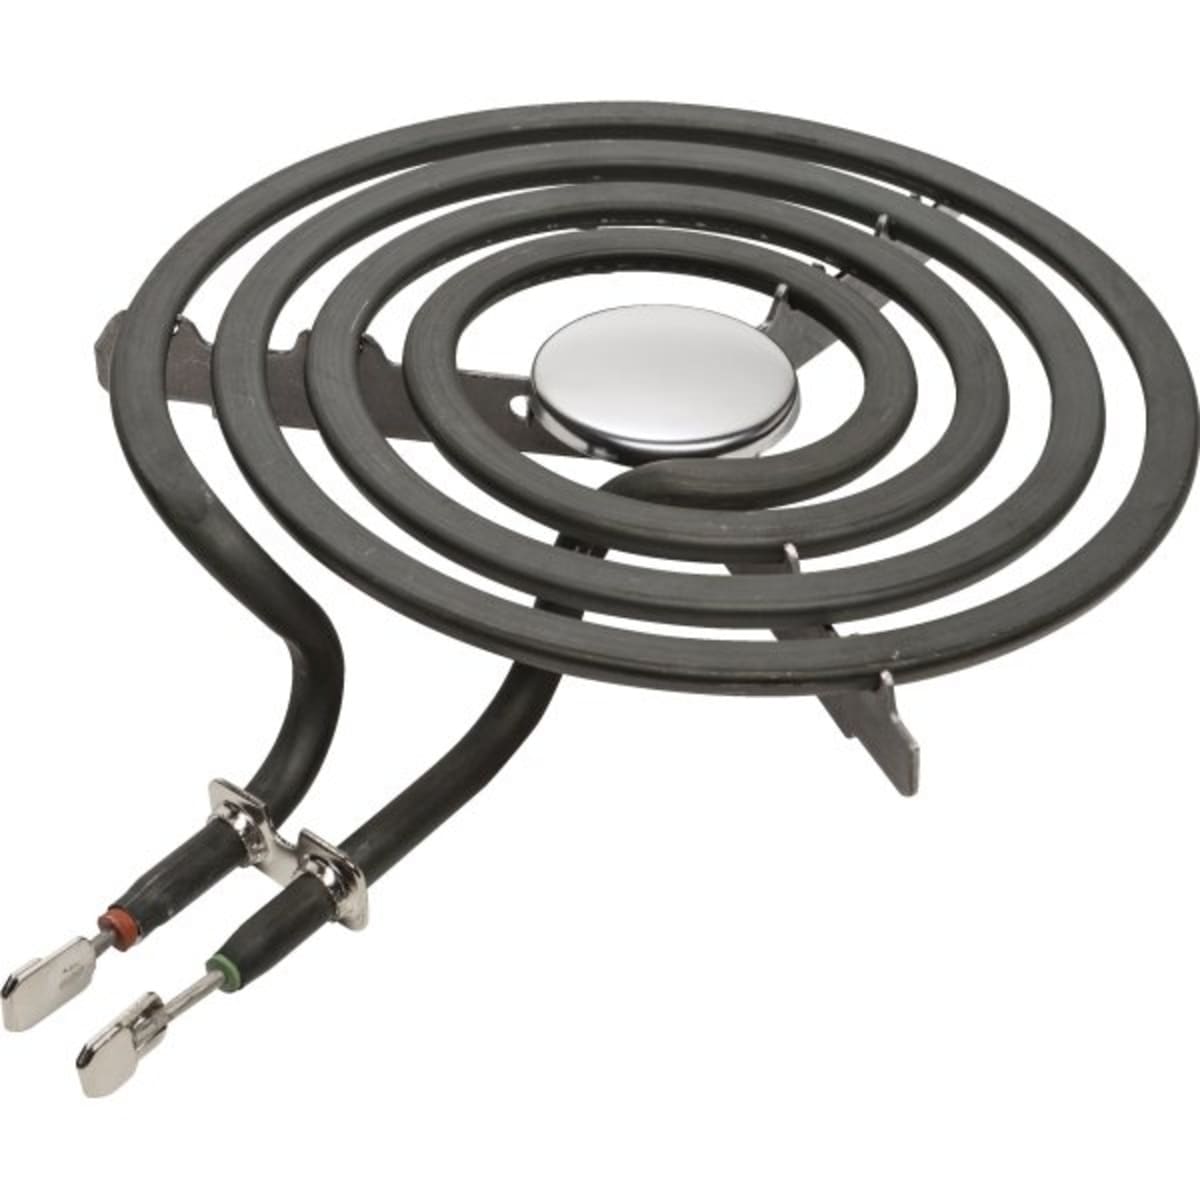 Apparsol 7 Stove Surface Burner Heating Element, 4 Turns replaces ERS48Y21 TJ90SP21YA SP21YA 814153 (2 Pack)